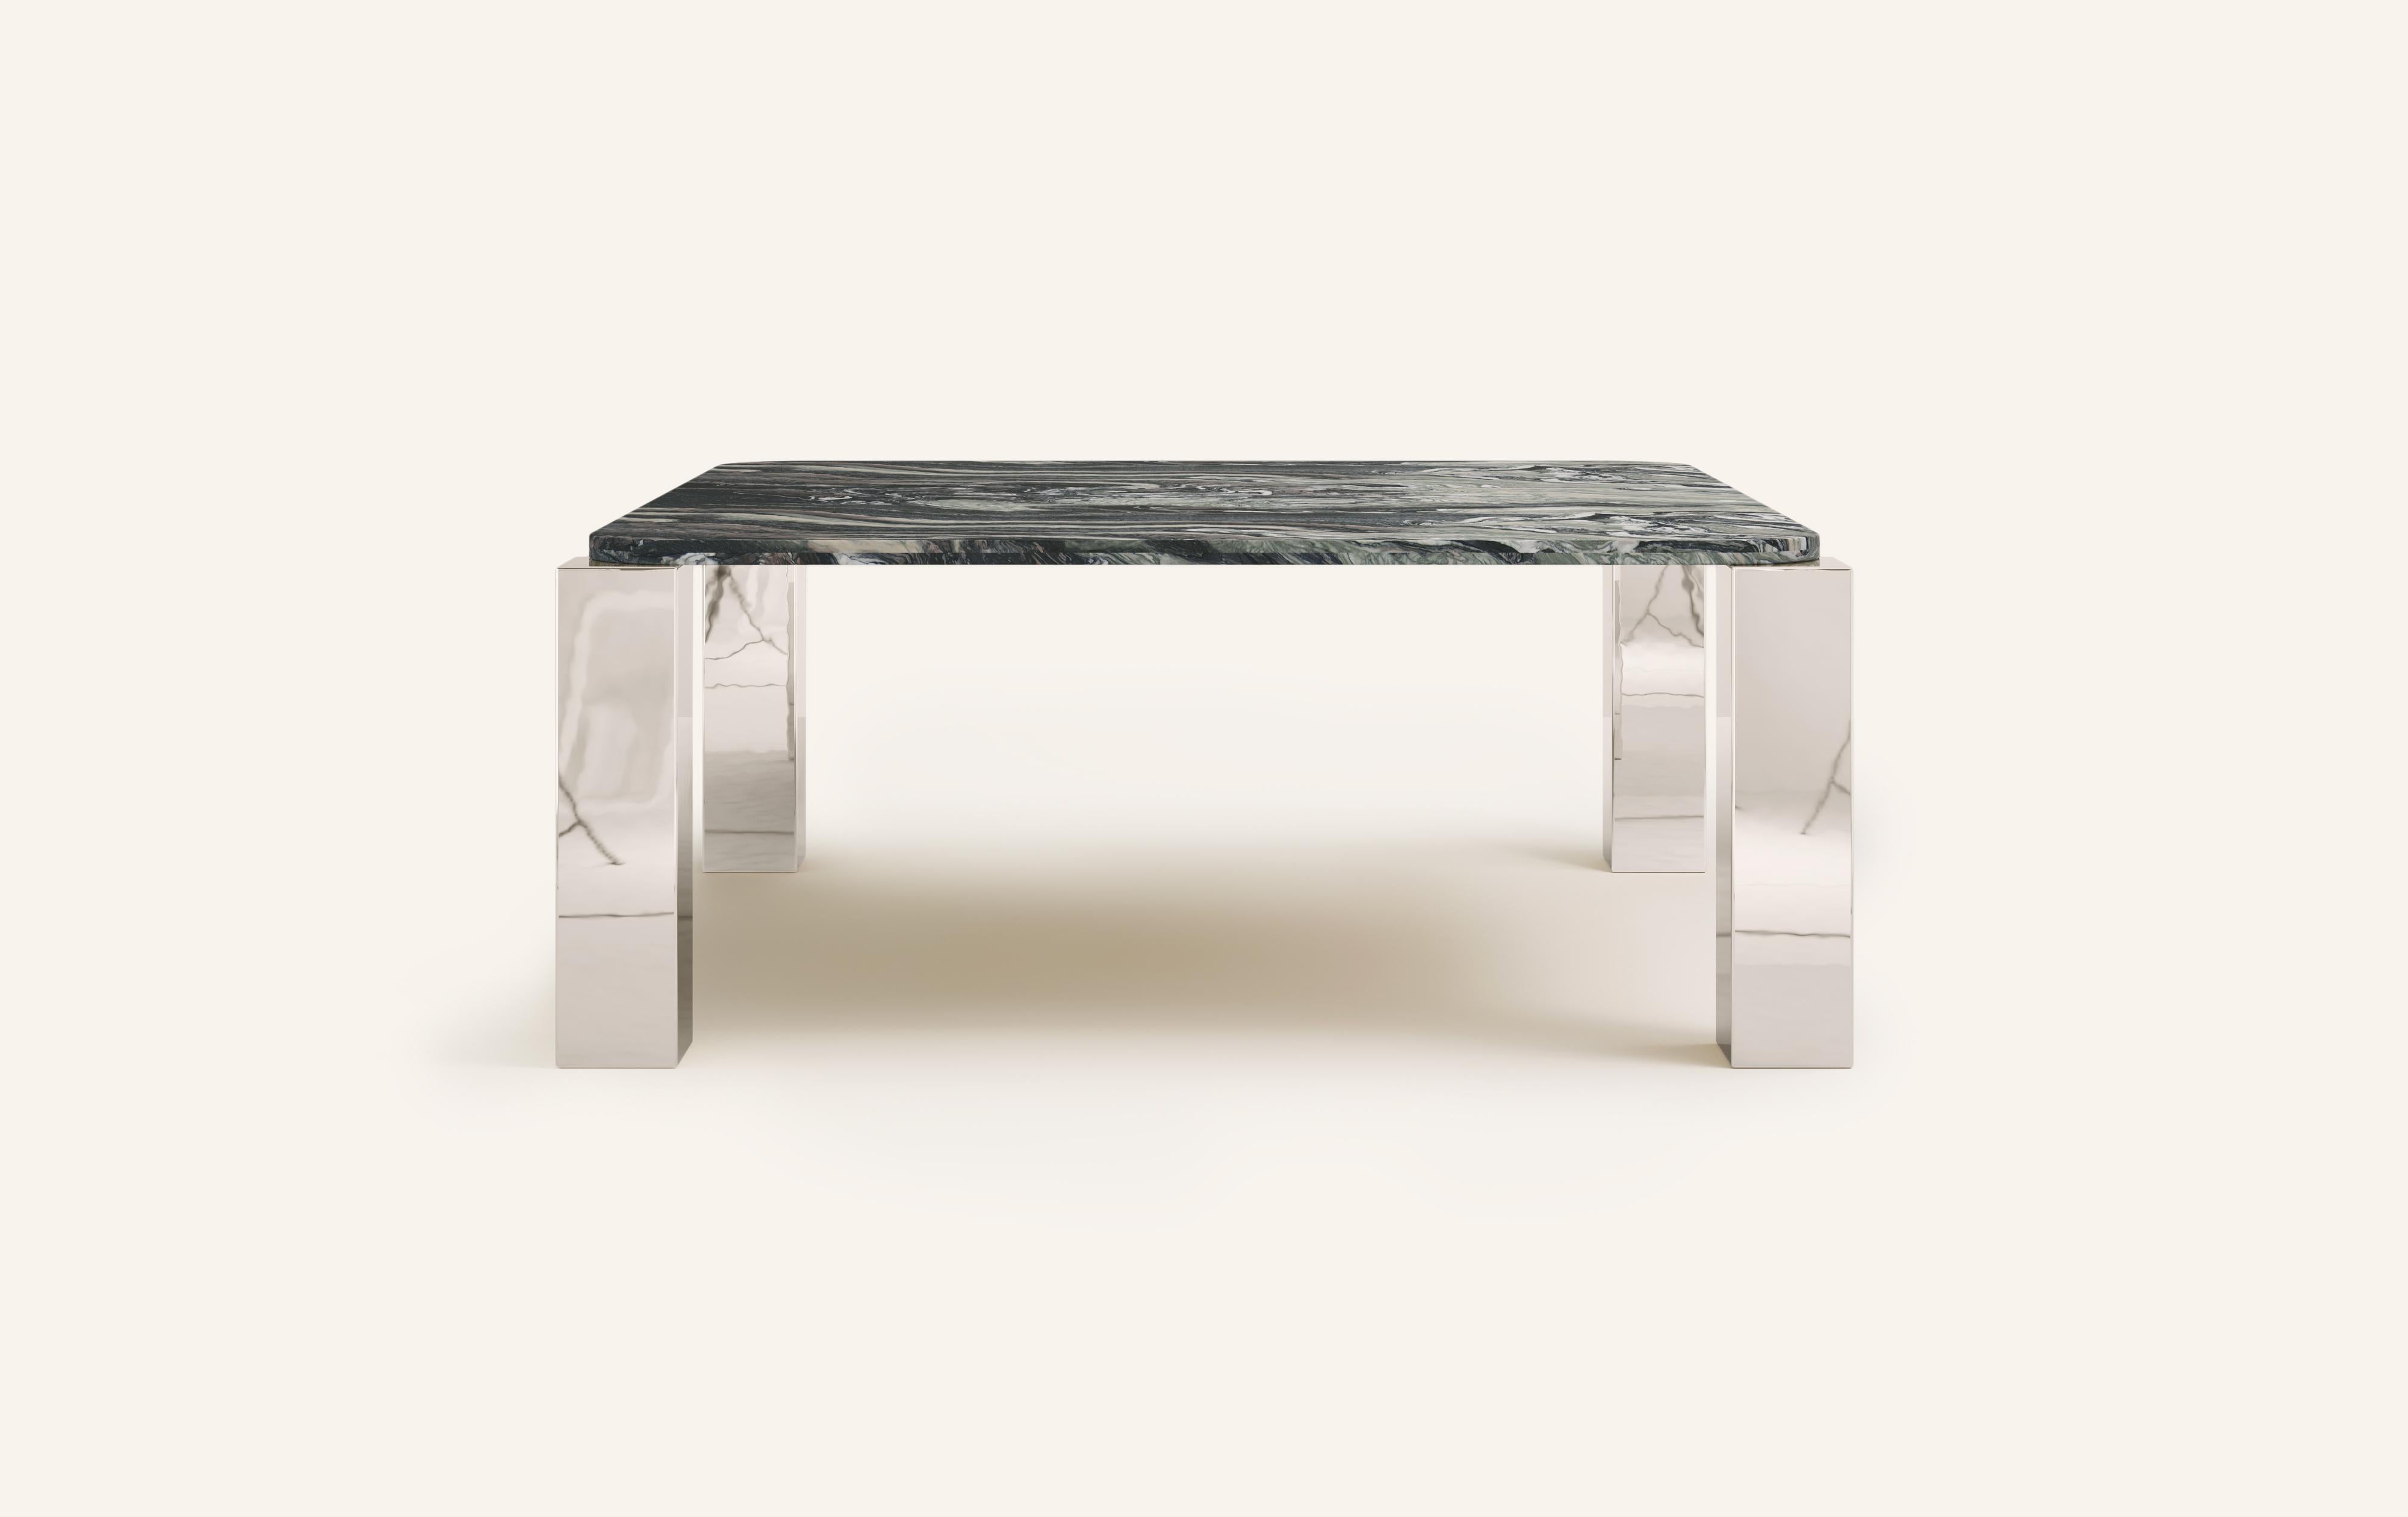 MONOLITHIC FORMS SOFTENED BY GENTLE EDGES. WITH ITS BOLD MARBLE PATTERNS CUBO IS AS VERSATILE AS IT IS STRIKING.

DIMENSIONS:
74”L x 74”W x 30”H: 
- 72”L x 72”W x 1.5” THICK TABLETOP WITH WITH 6